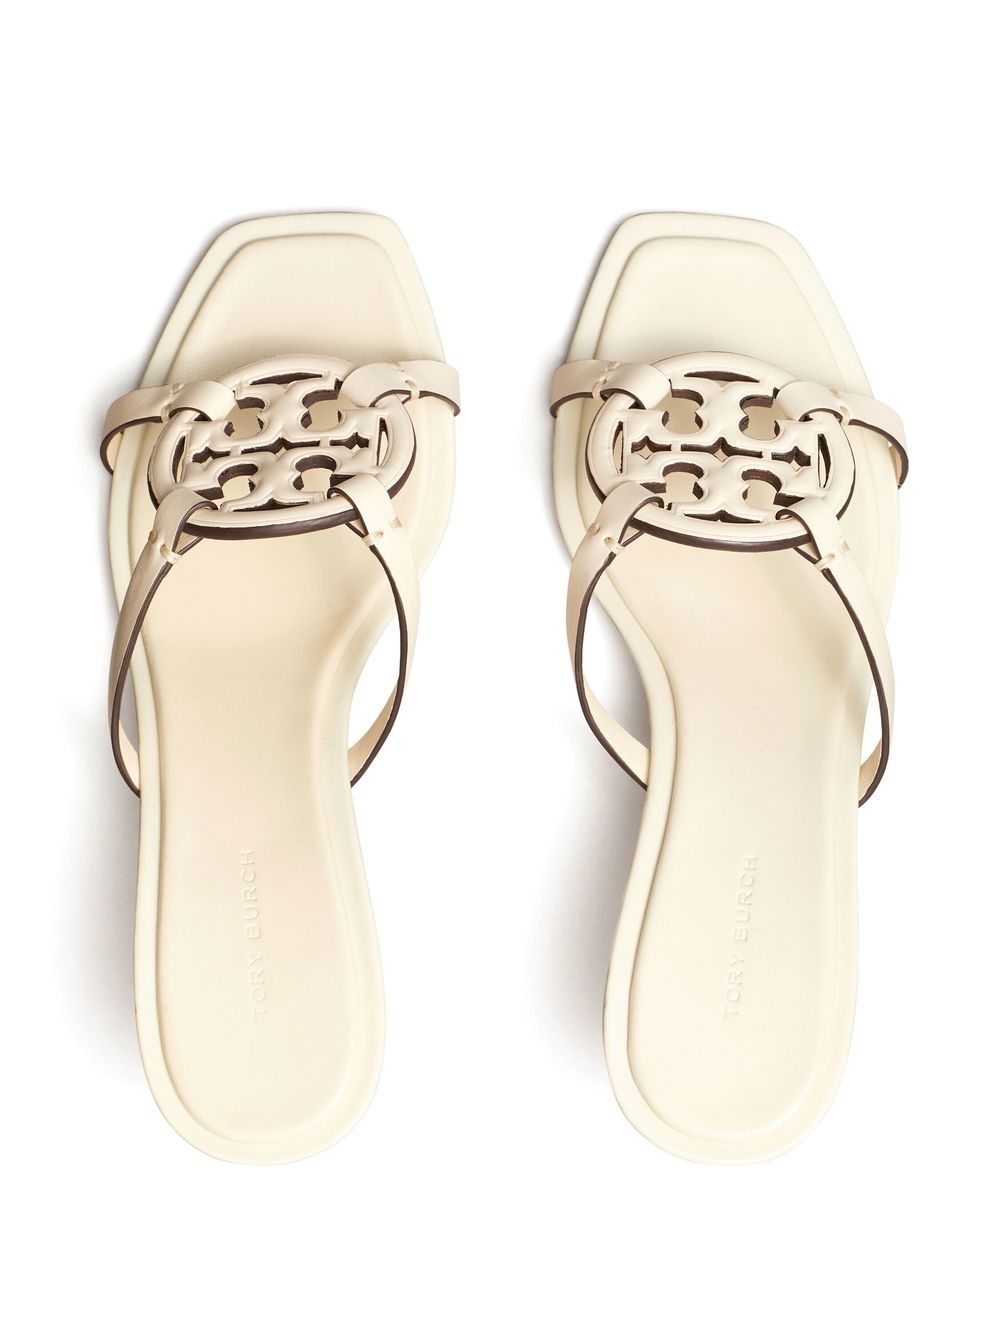 Tory Burch Geo Bombe Miller 55mm Leather Sandals - Farfetch